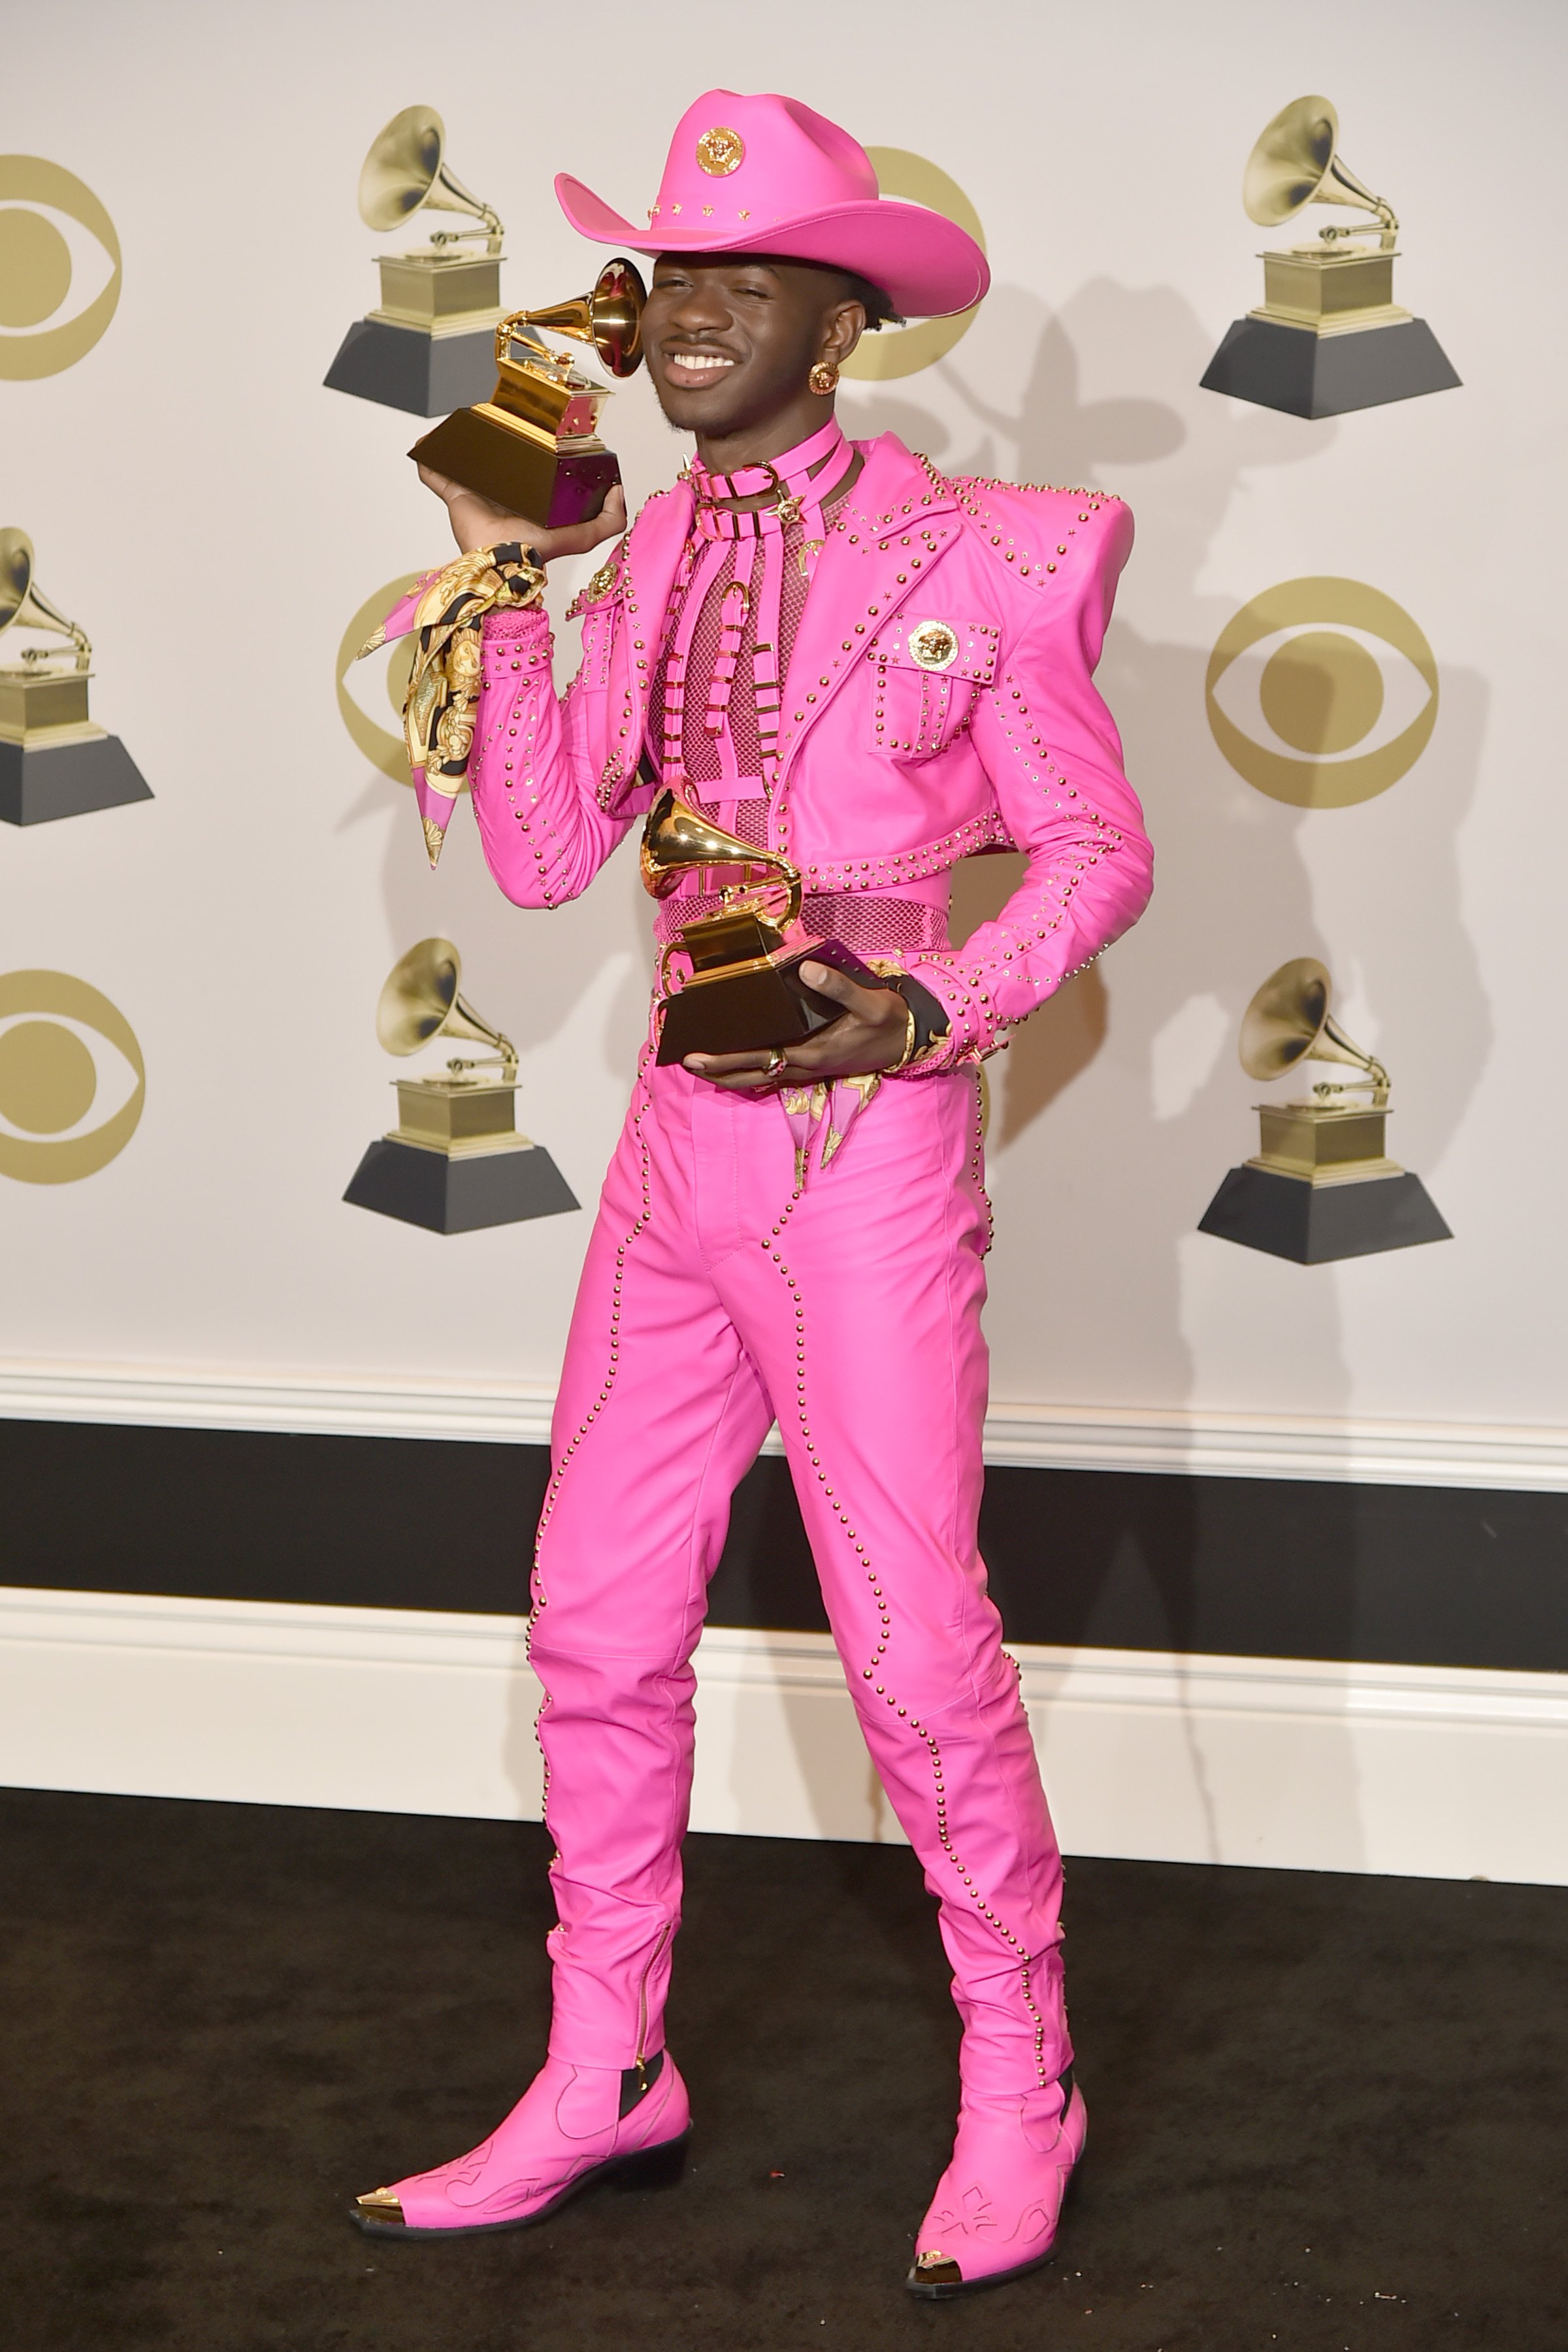 Lil Nas X at the 62nd Annual Grammy Awards on Jan. 26, 2020 in California | Photo: Getty Images